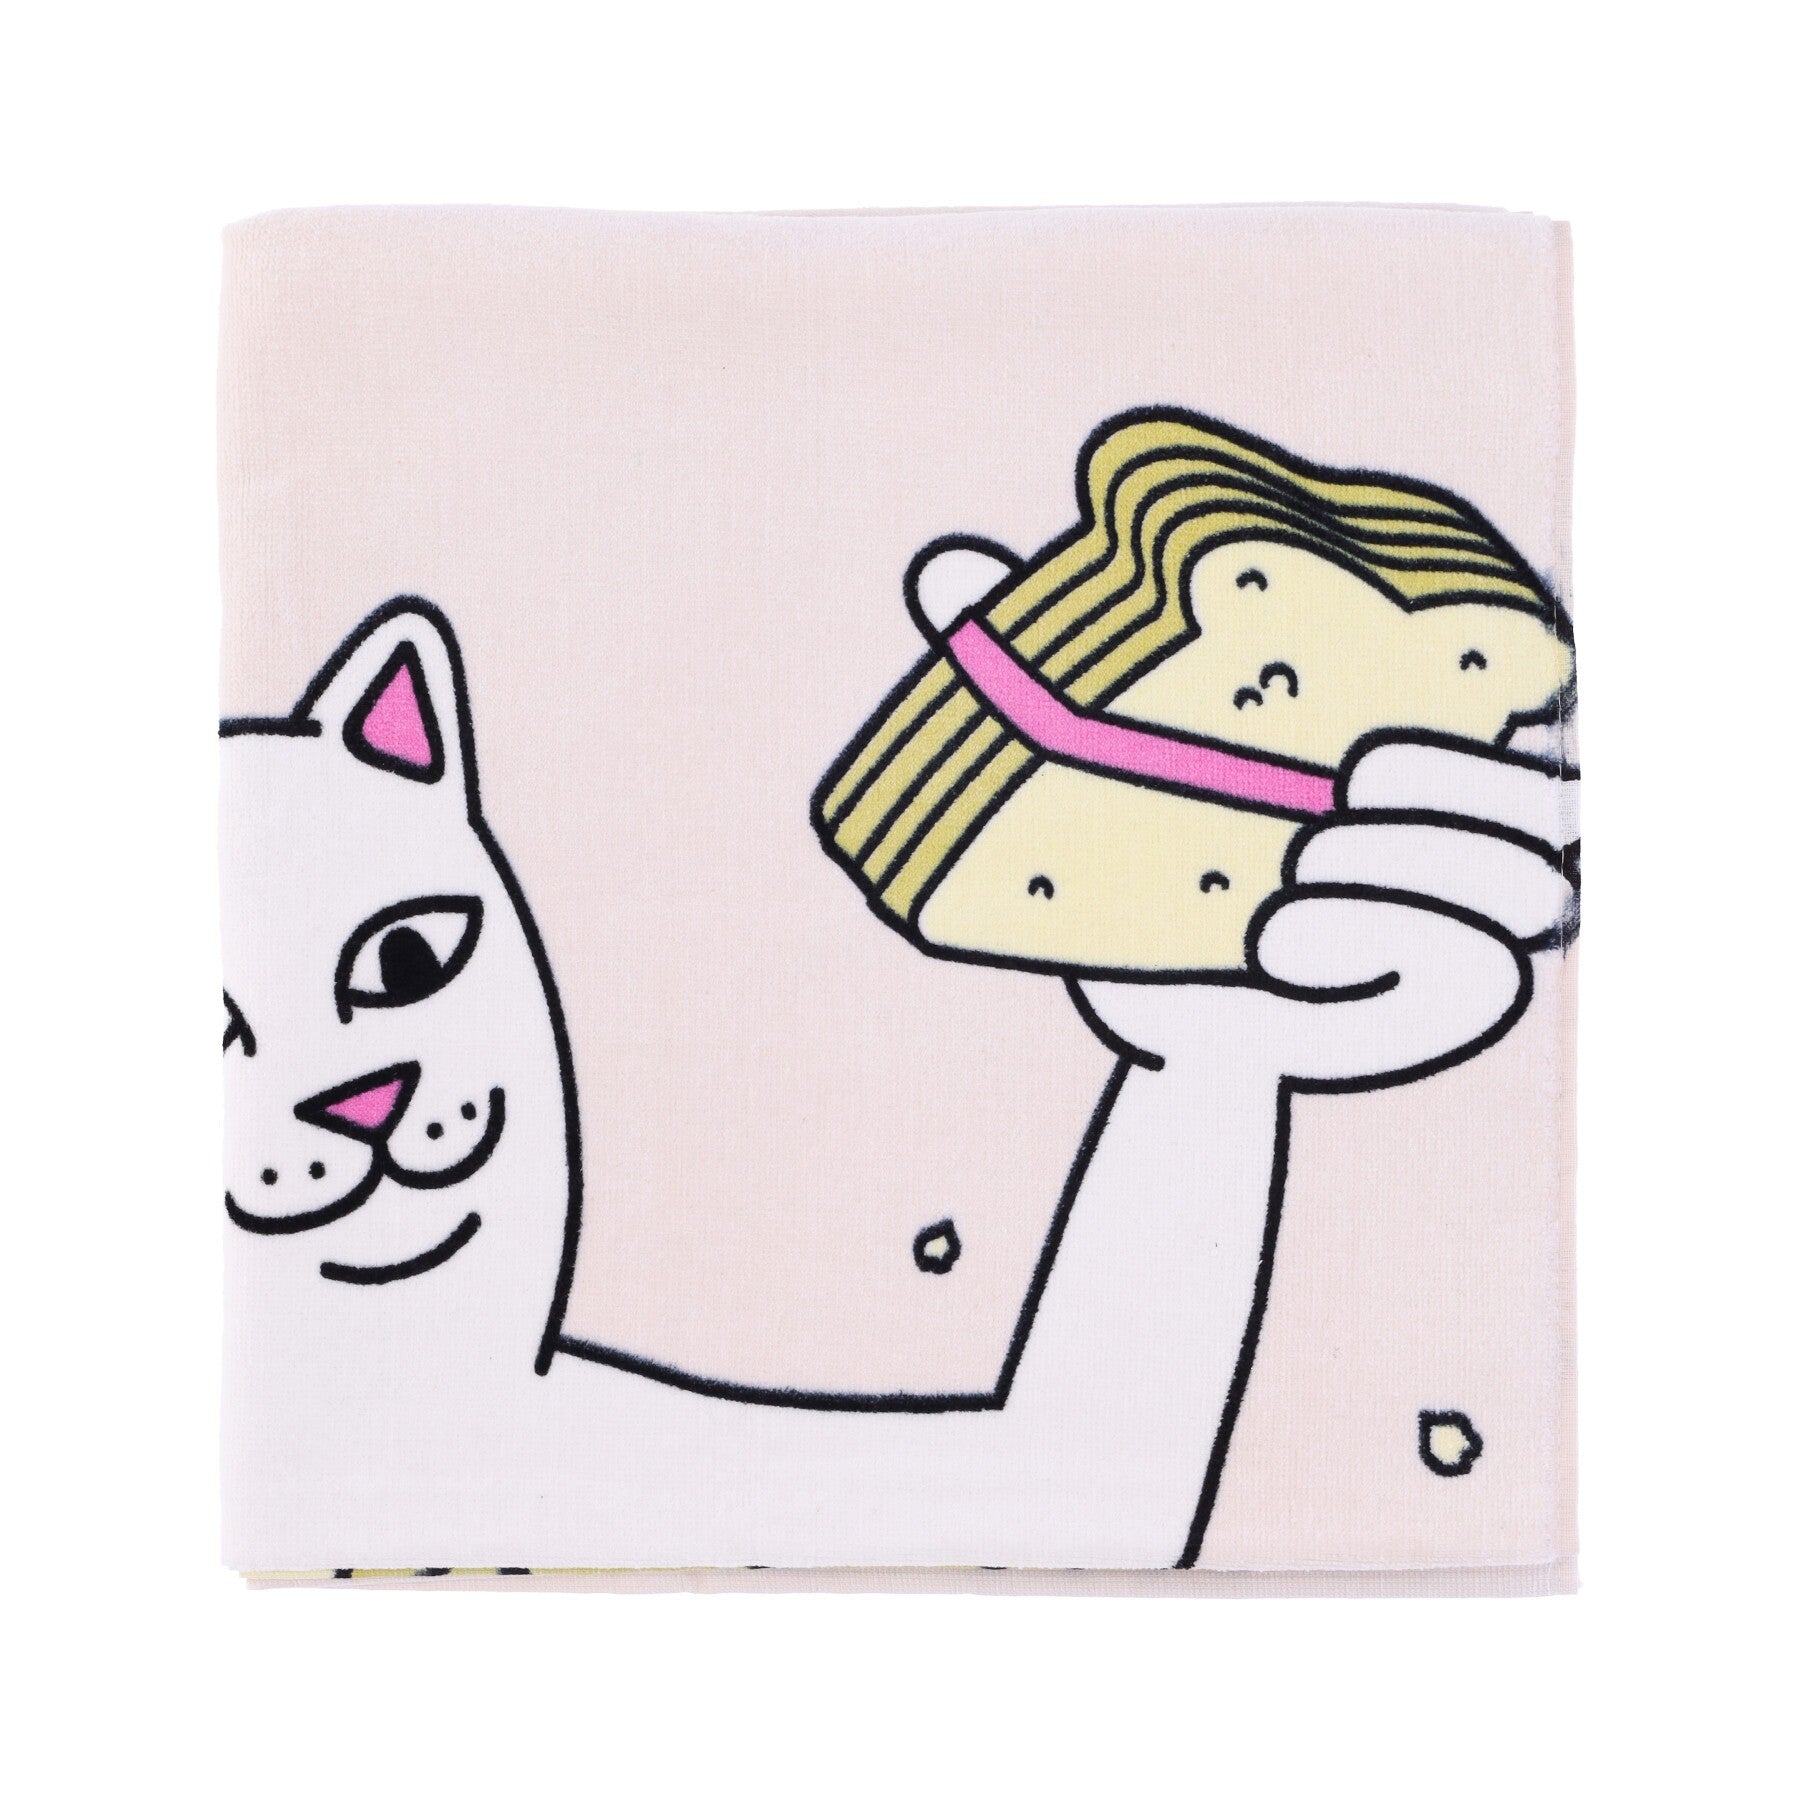 Unisex Towel Lets Get This Bread Beach Towel Natural